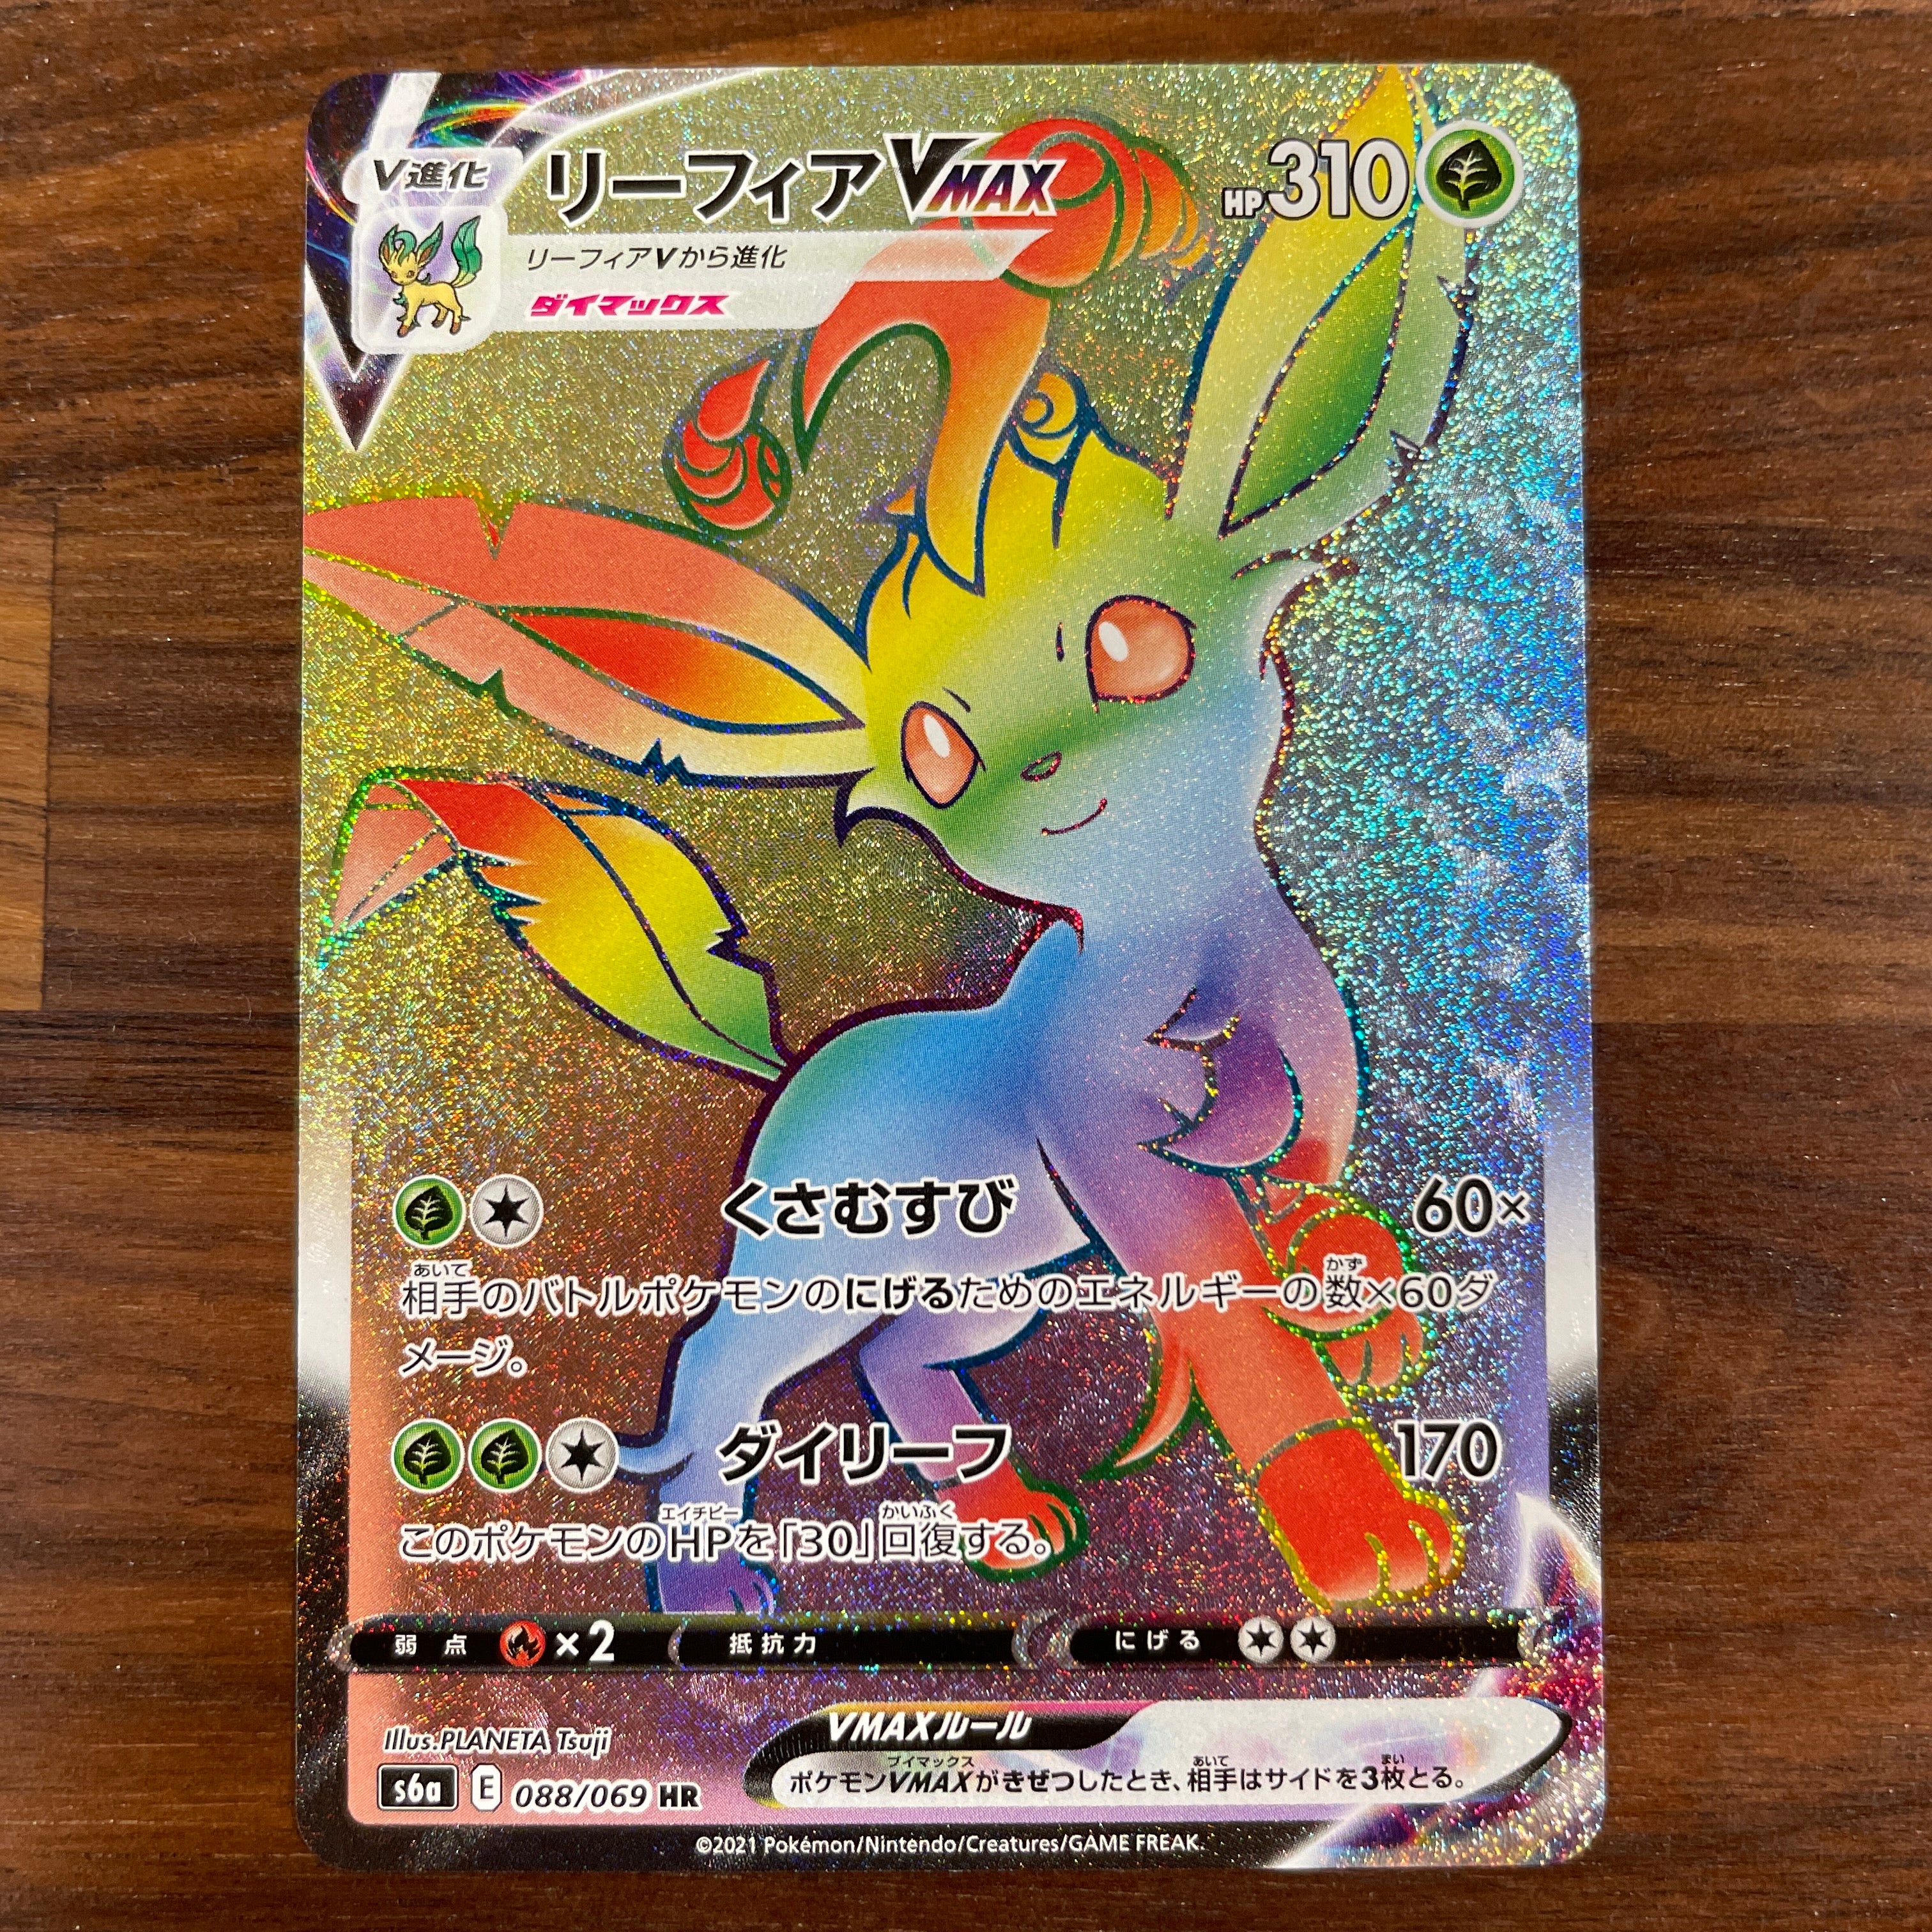 POKÉMON CARD GAME Sword & Shield Expansion pack ｢Eevee Heroes｣  POKÉMON CARD GAME s6a 088/069 Hyper Rare card  Leafeon VMAX